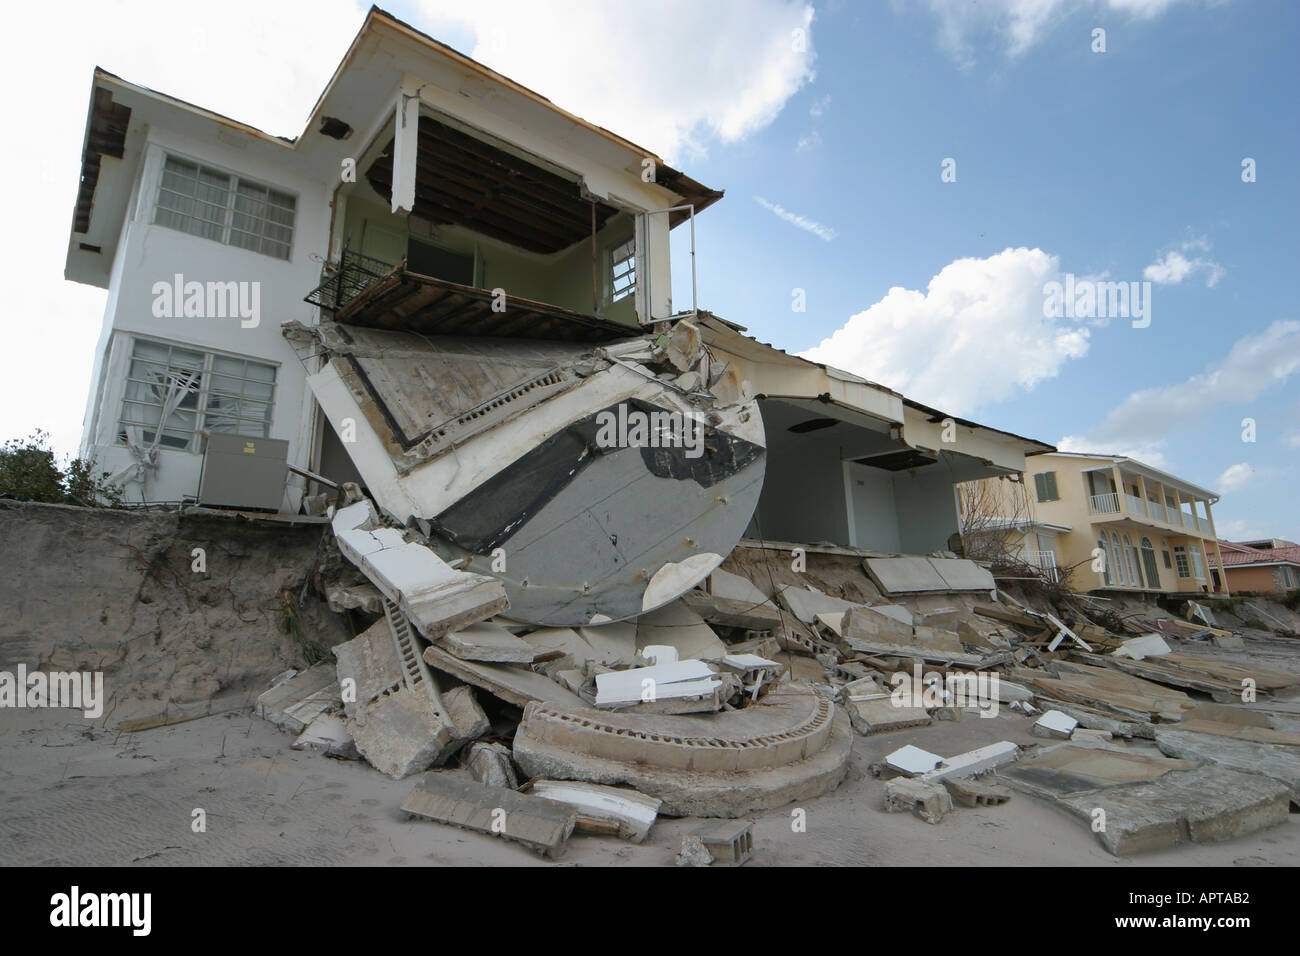 Hurricane Jeanne Damage High Resolution Stock Photography and Images - Alamy